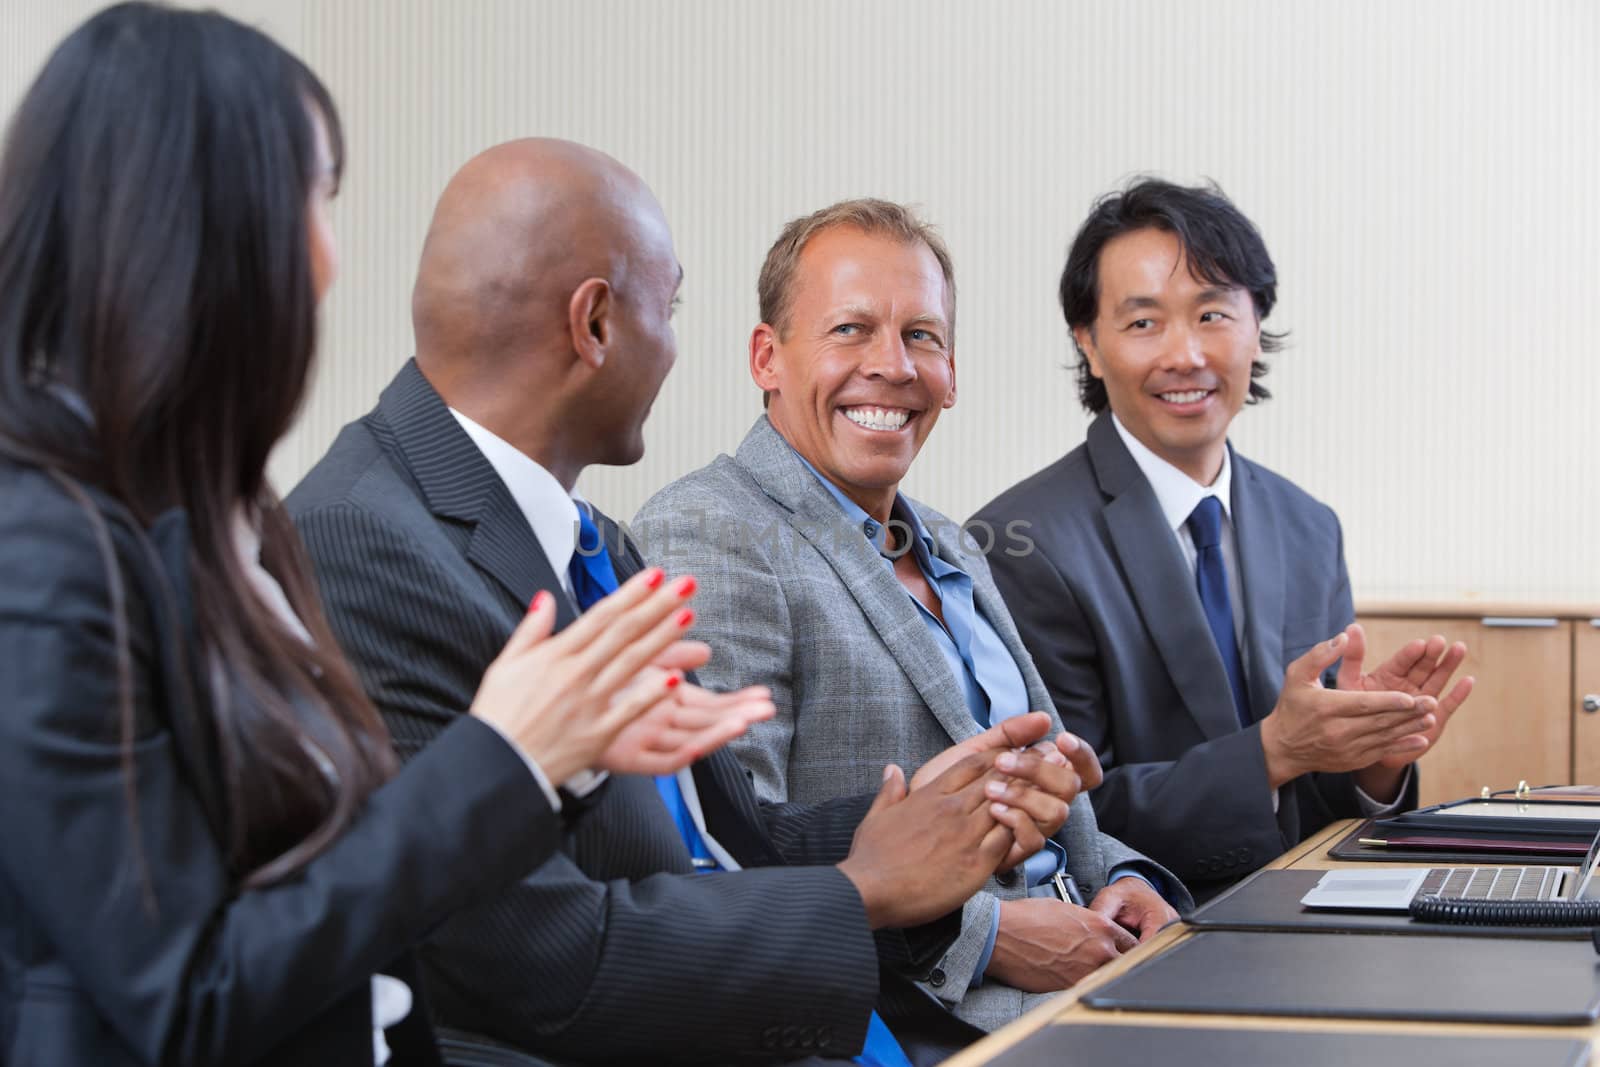 Professionals applauding during a business meeting